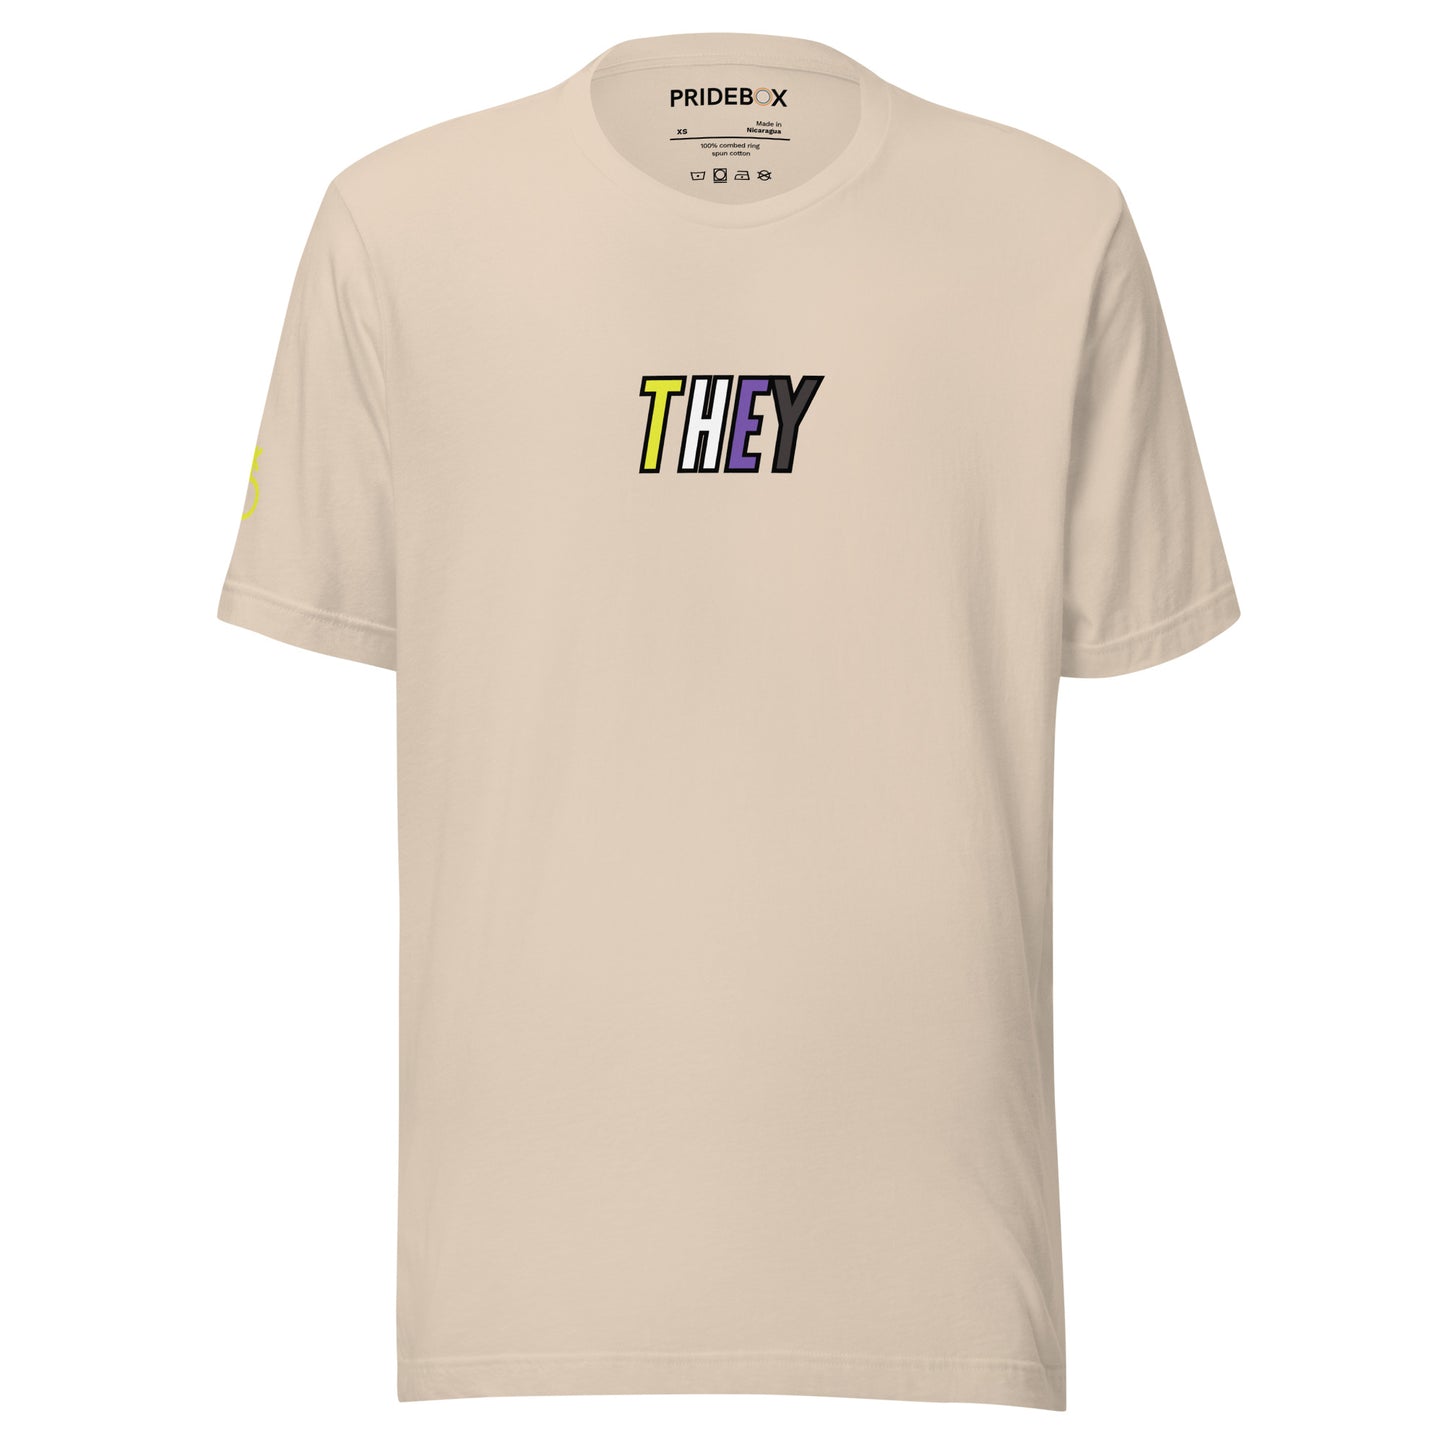 NonBinary Pride They Unisex t-shirt